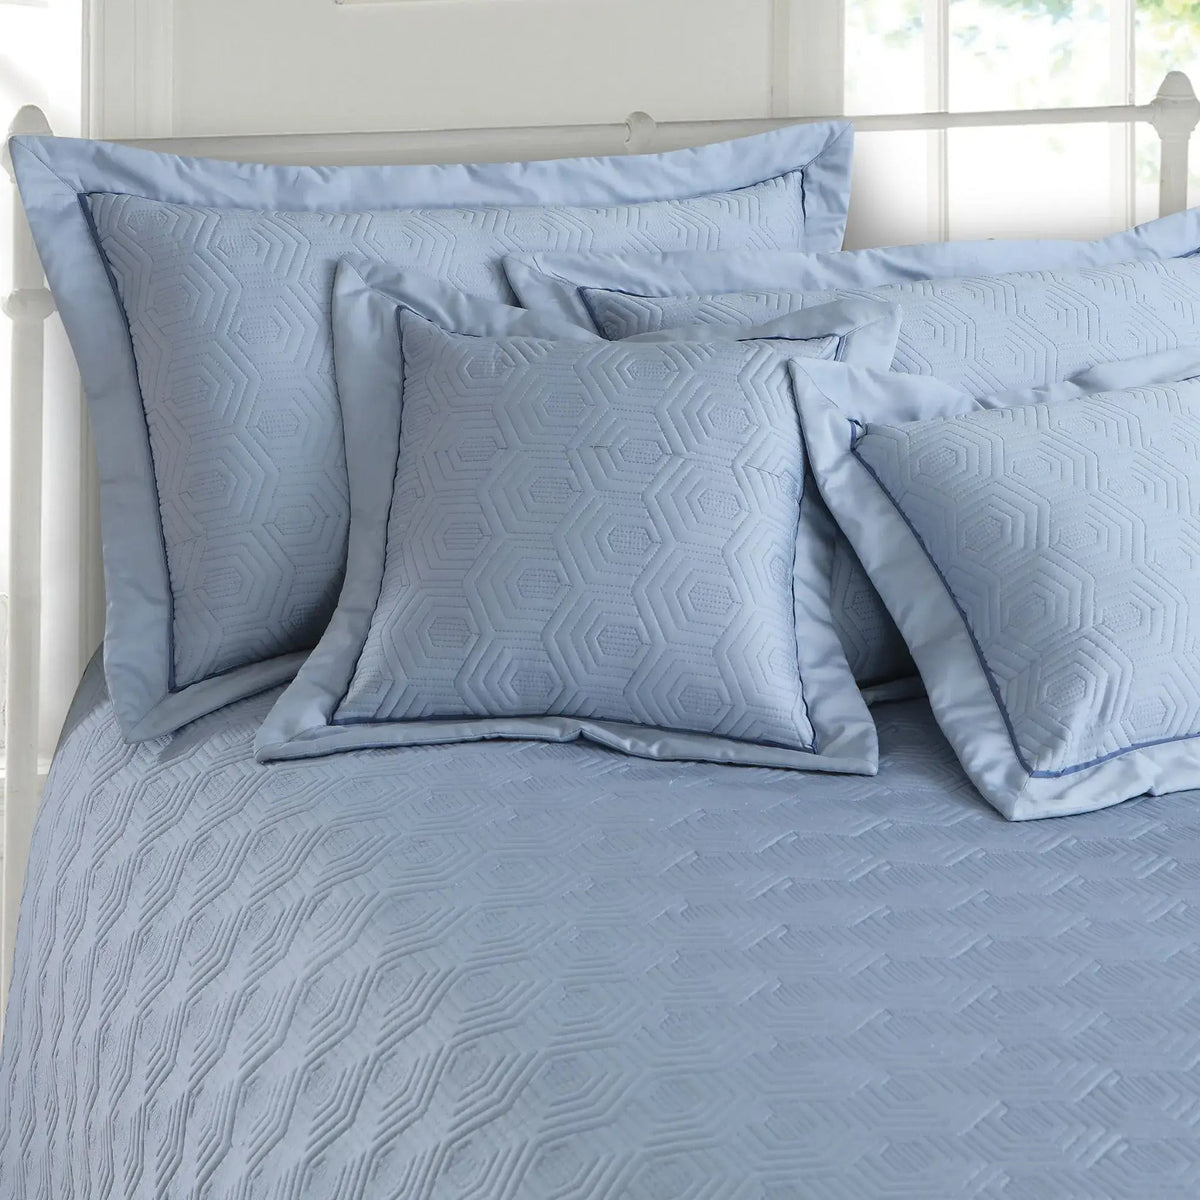 Malako Kairo 500 TC Sky Blue Solid King Size 100% Cotton Quilted Bed Cover Set - MALAKO